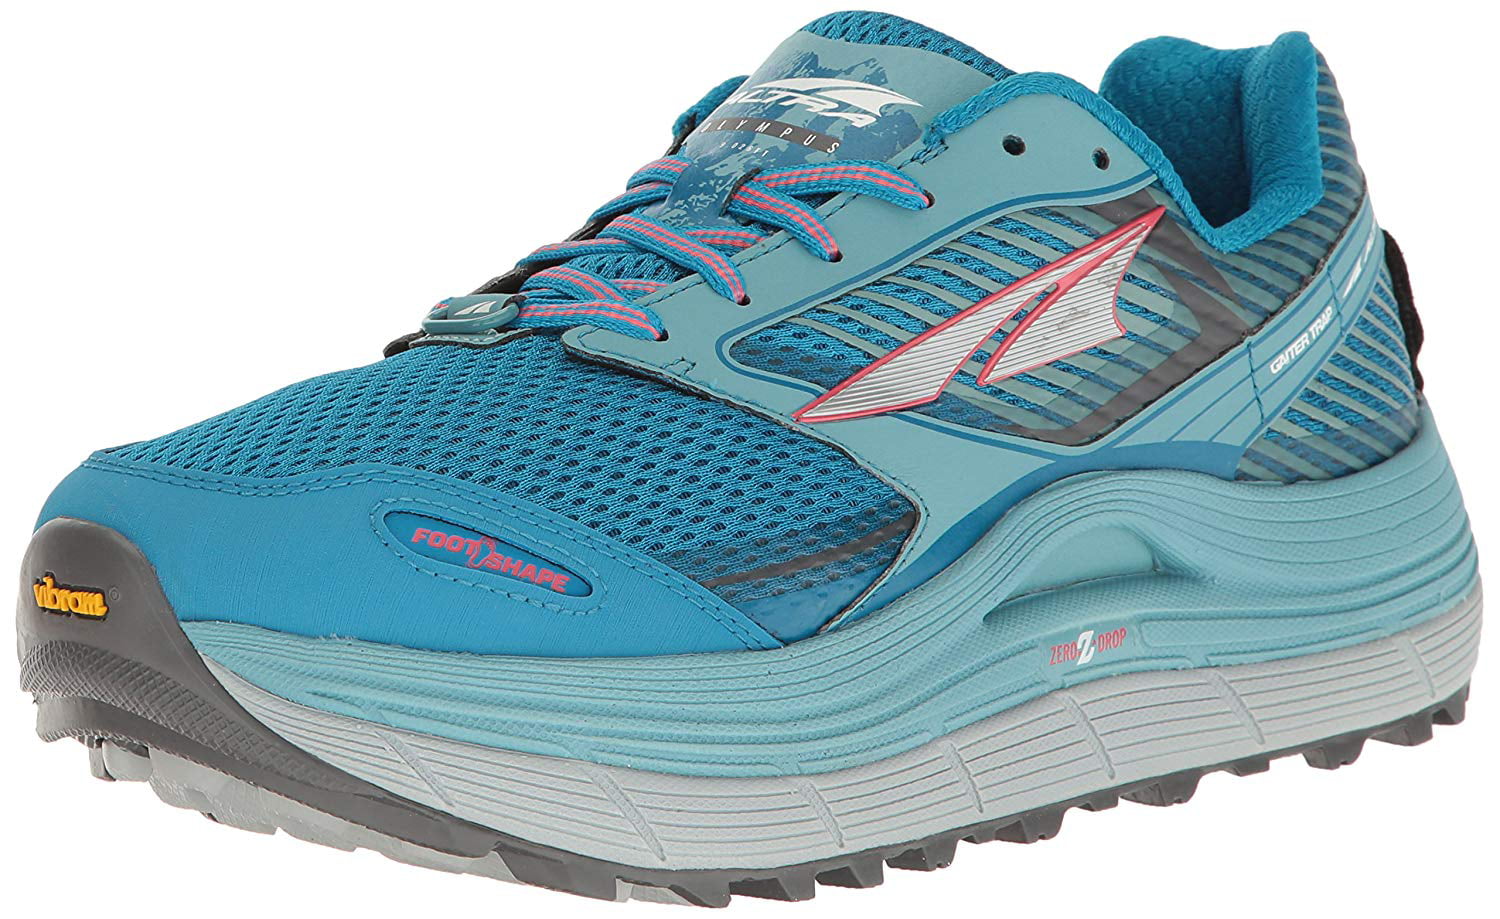 Altra Women's Olympus 2.5 Athletic Trail Running Shoes LT Blue Size 5 ...